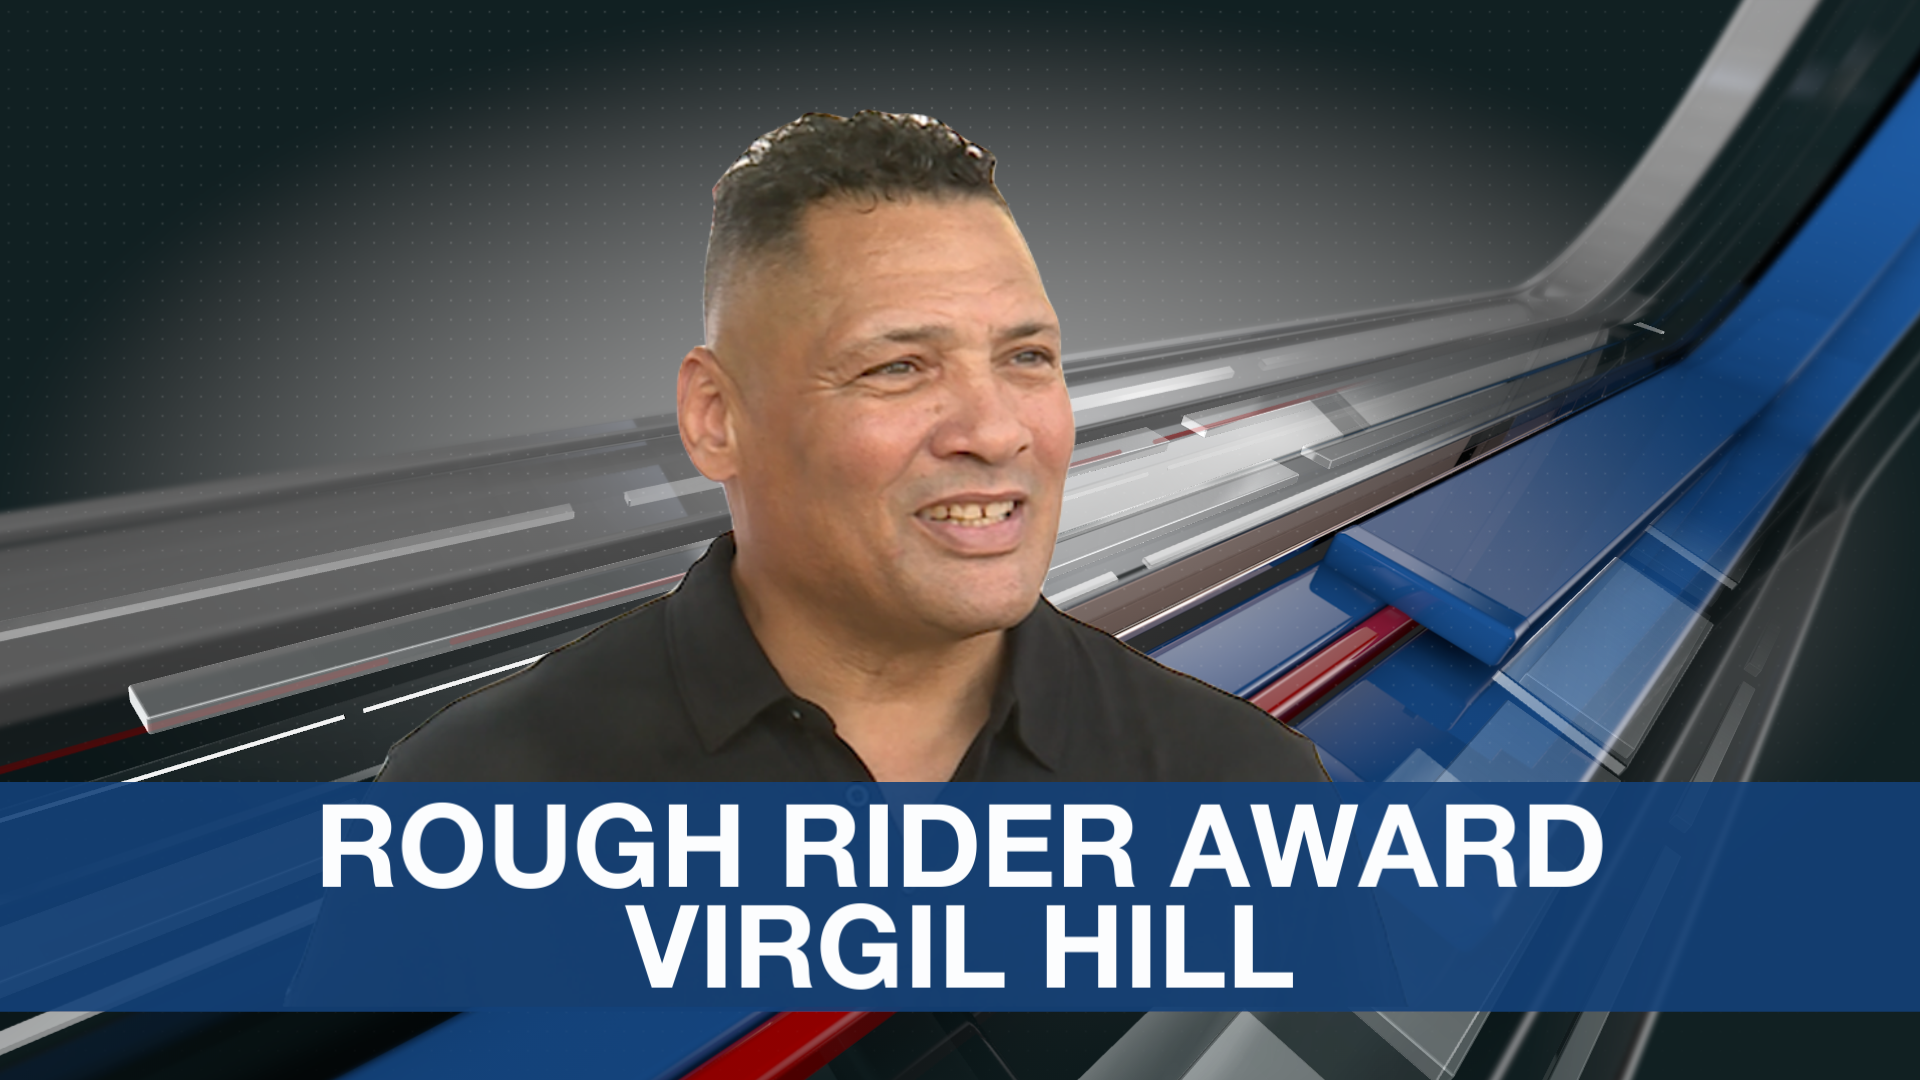 Virgil Hill: the 48th recipient of the Rough Rider Award